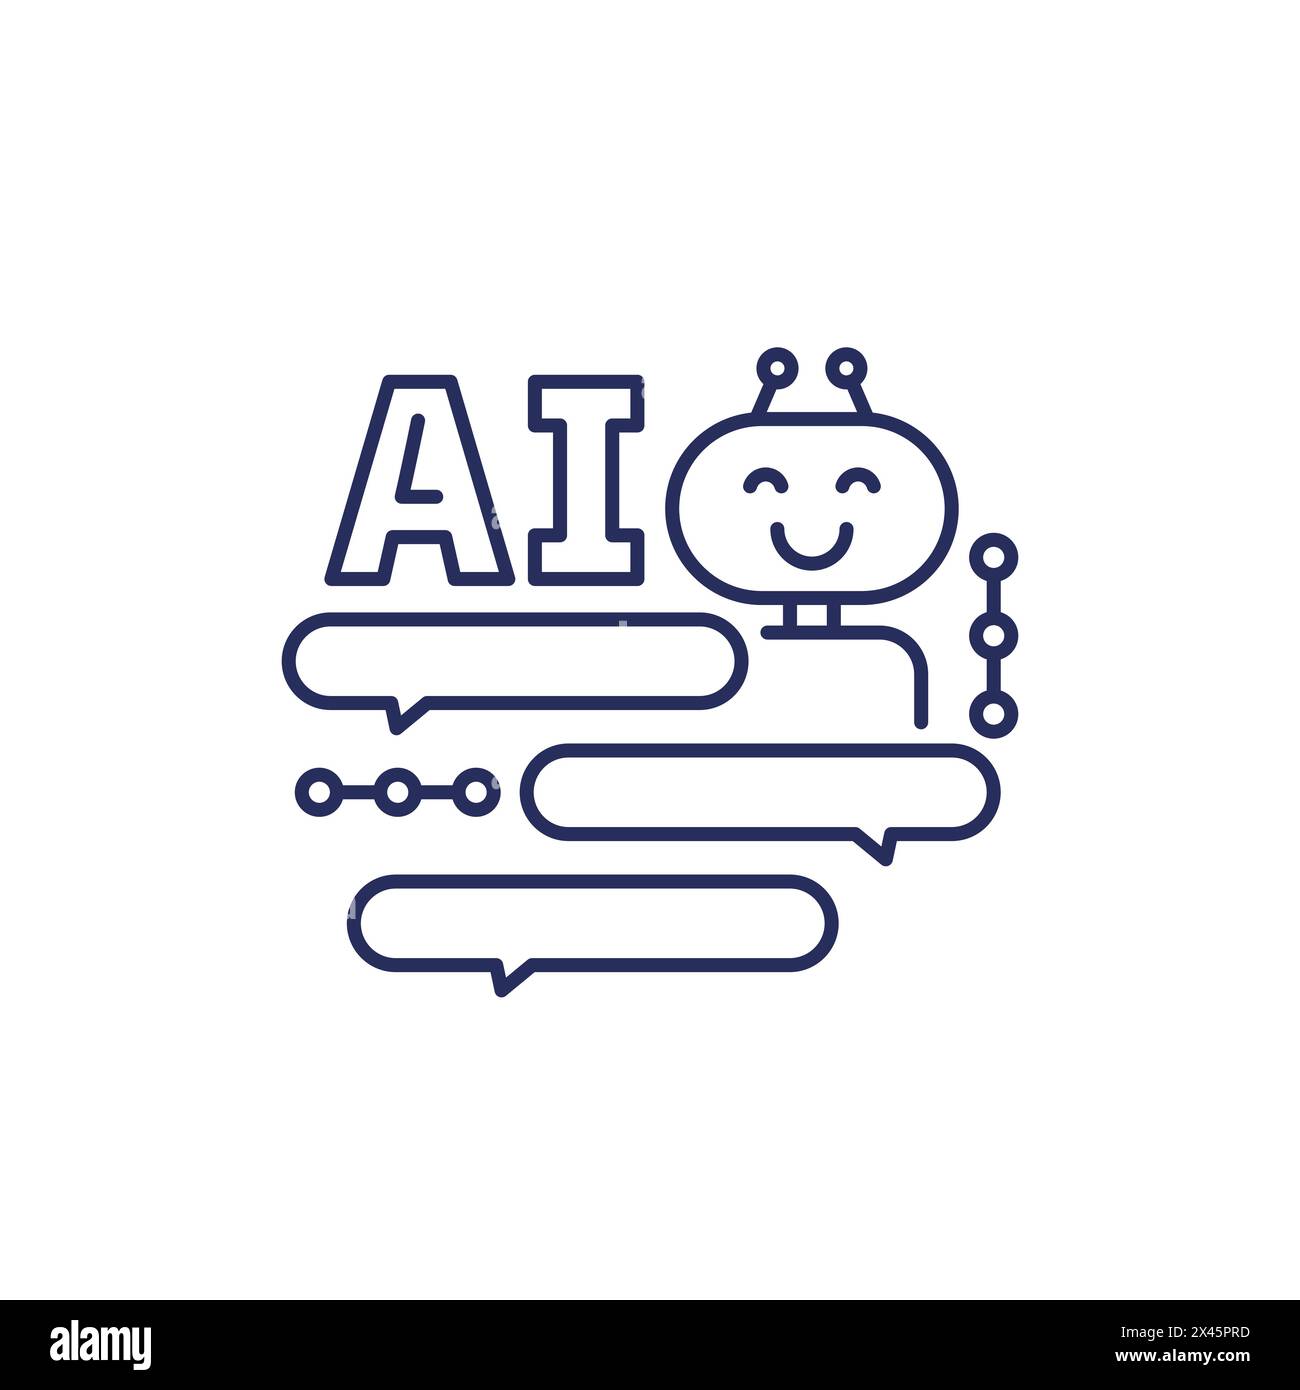 AI chat bot icon, Artificial intelligence vector Stock Vector